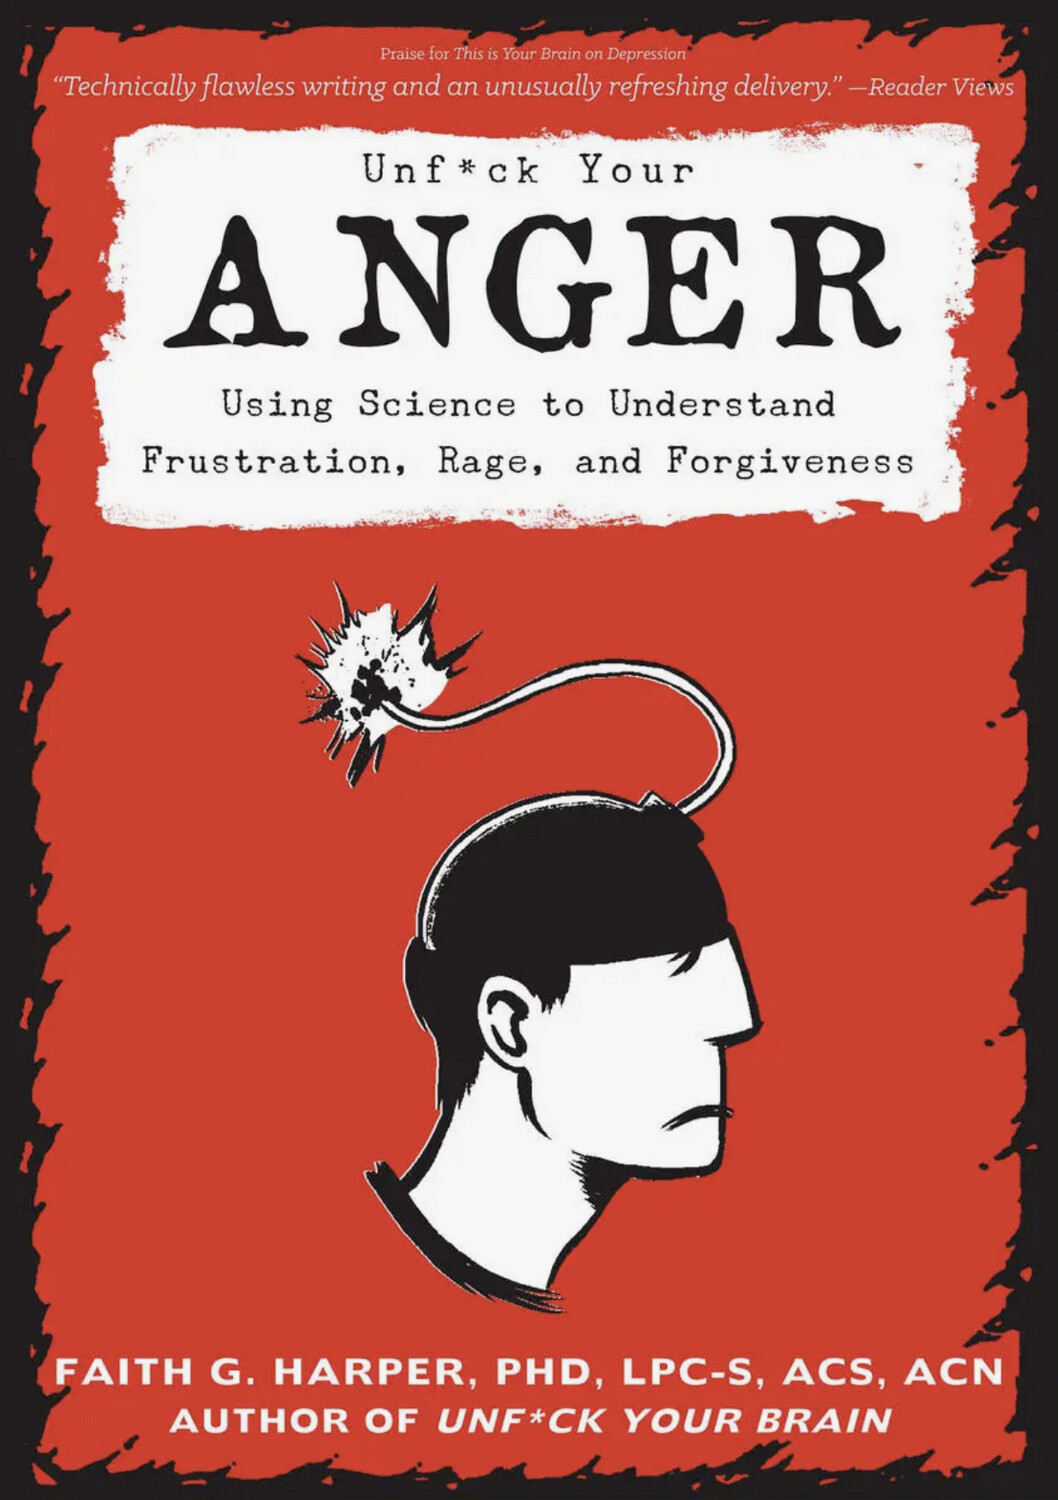 Unfuck Your Anger - Book by Dr. Faith G. Harper